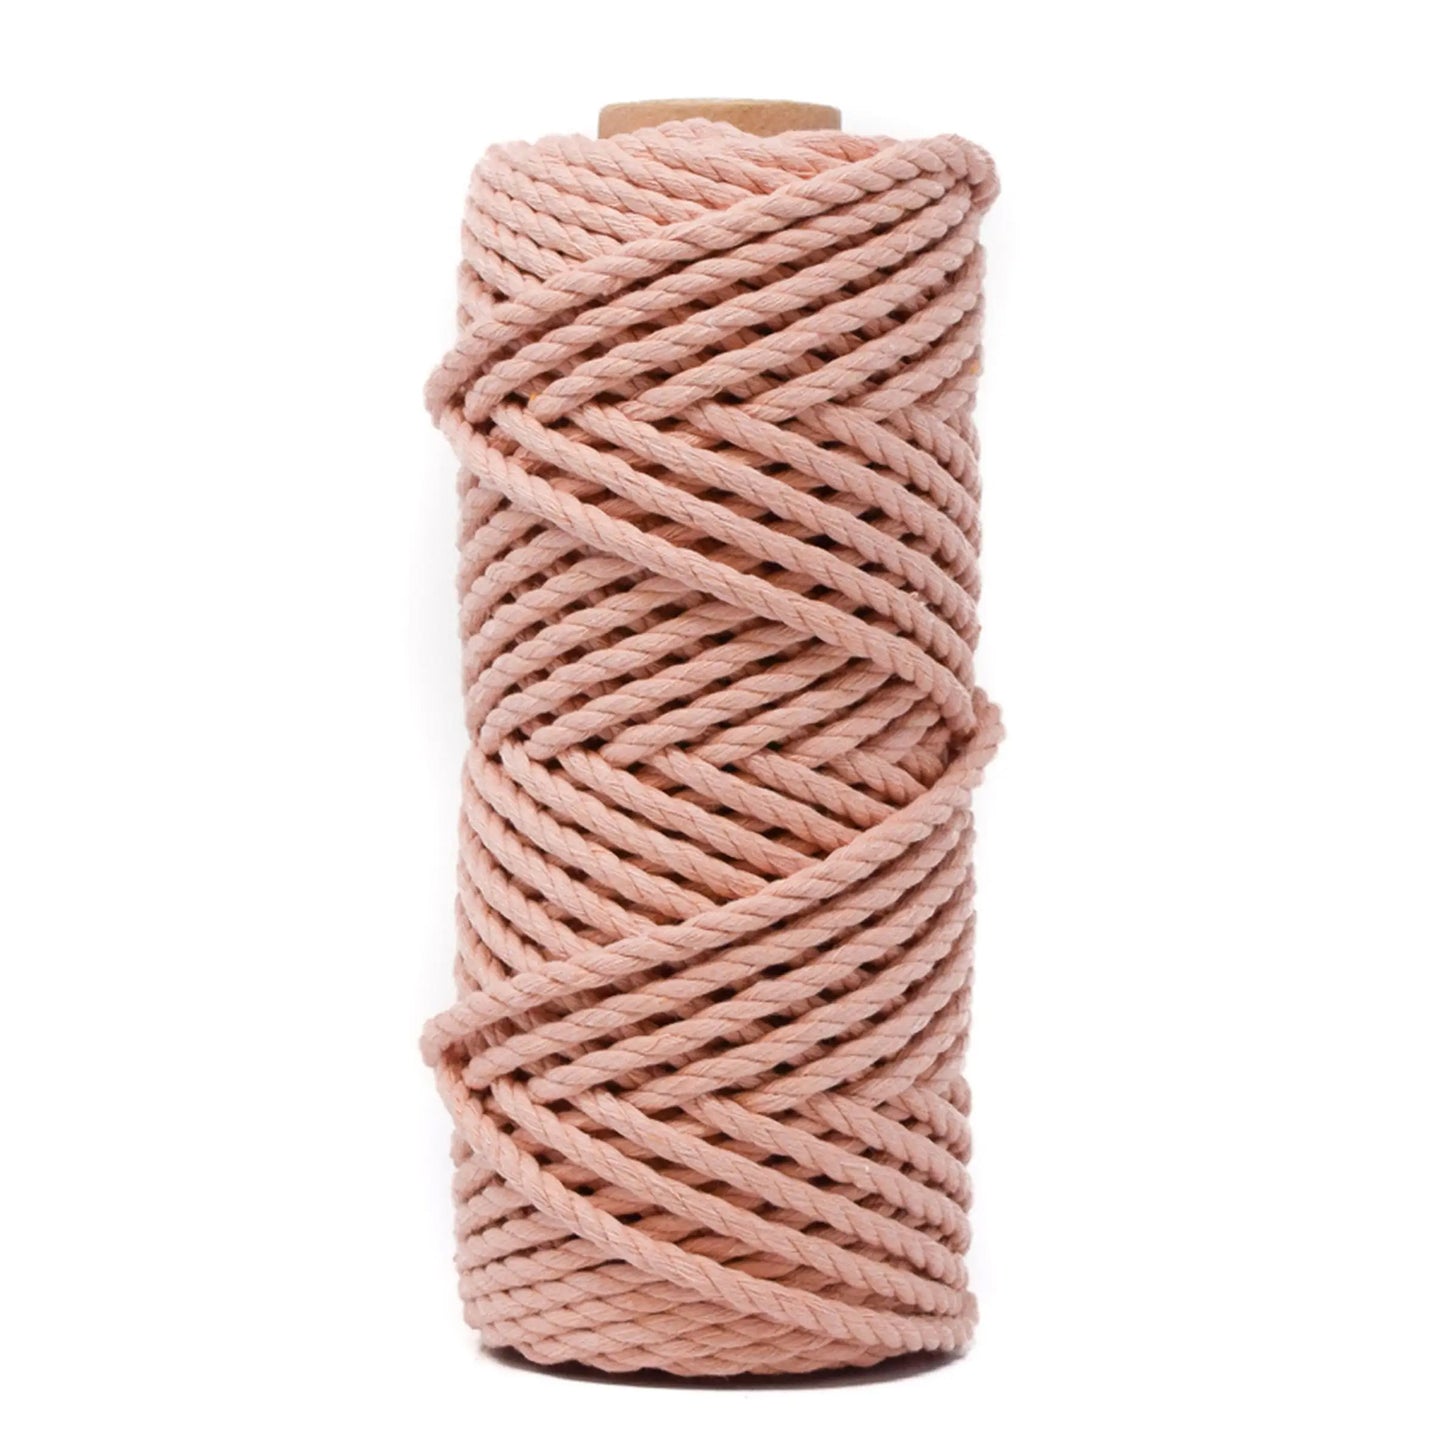 NEW // 3 Ply Recycled Cotton Rope - 5 Mm - 50 yd